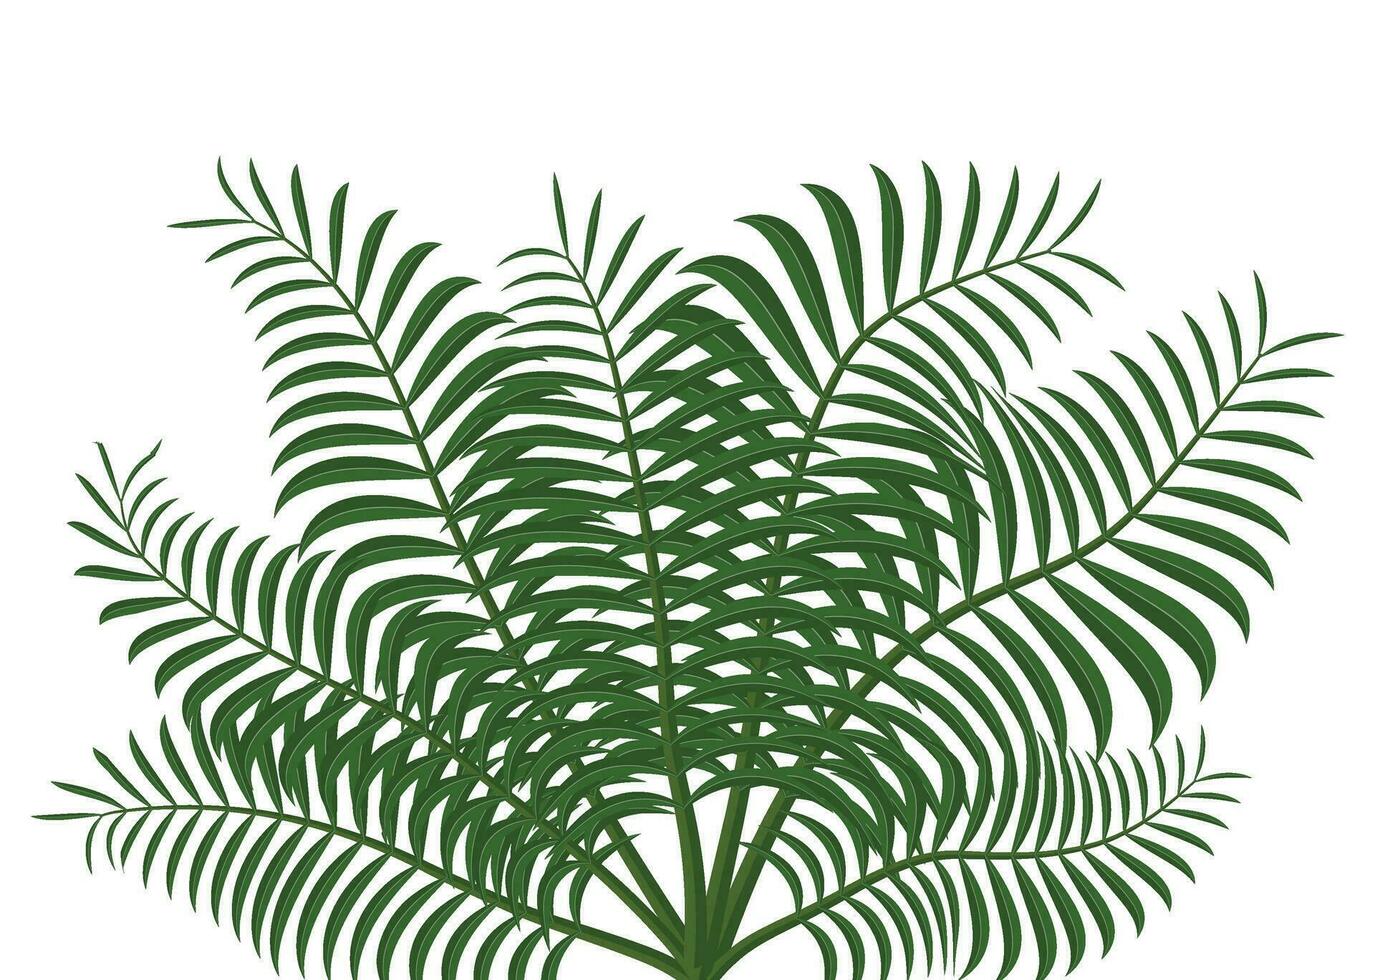 tropical leaves plant isolated icon vector illustration design  vector illustration design, two palm leaves are shown on a white background